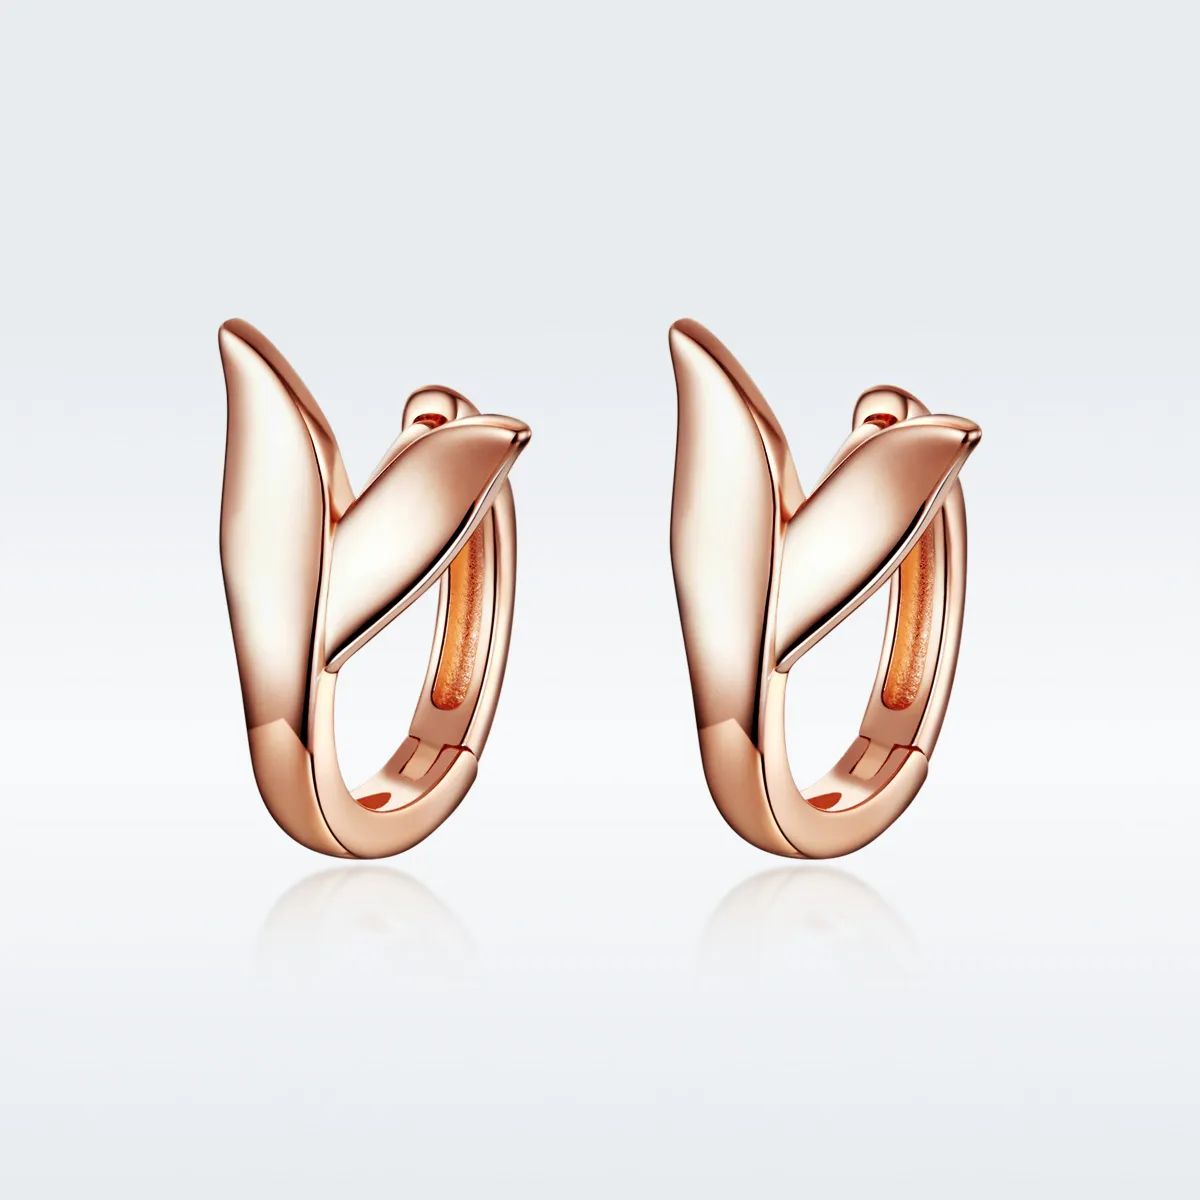 Pandora Style Rose Gold Dolphin Tail Hoop Earrings - BSE078